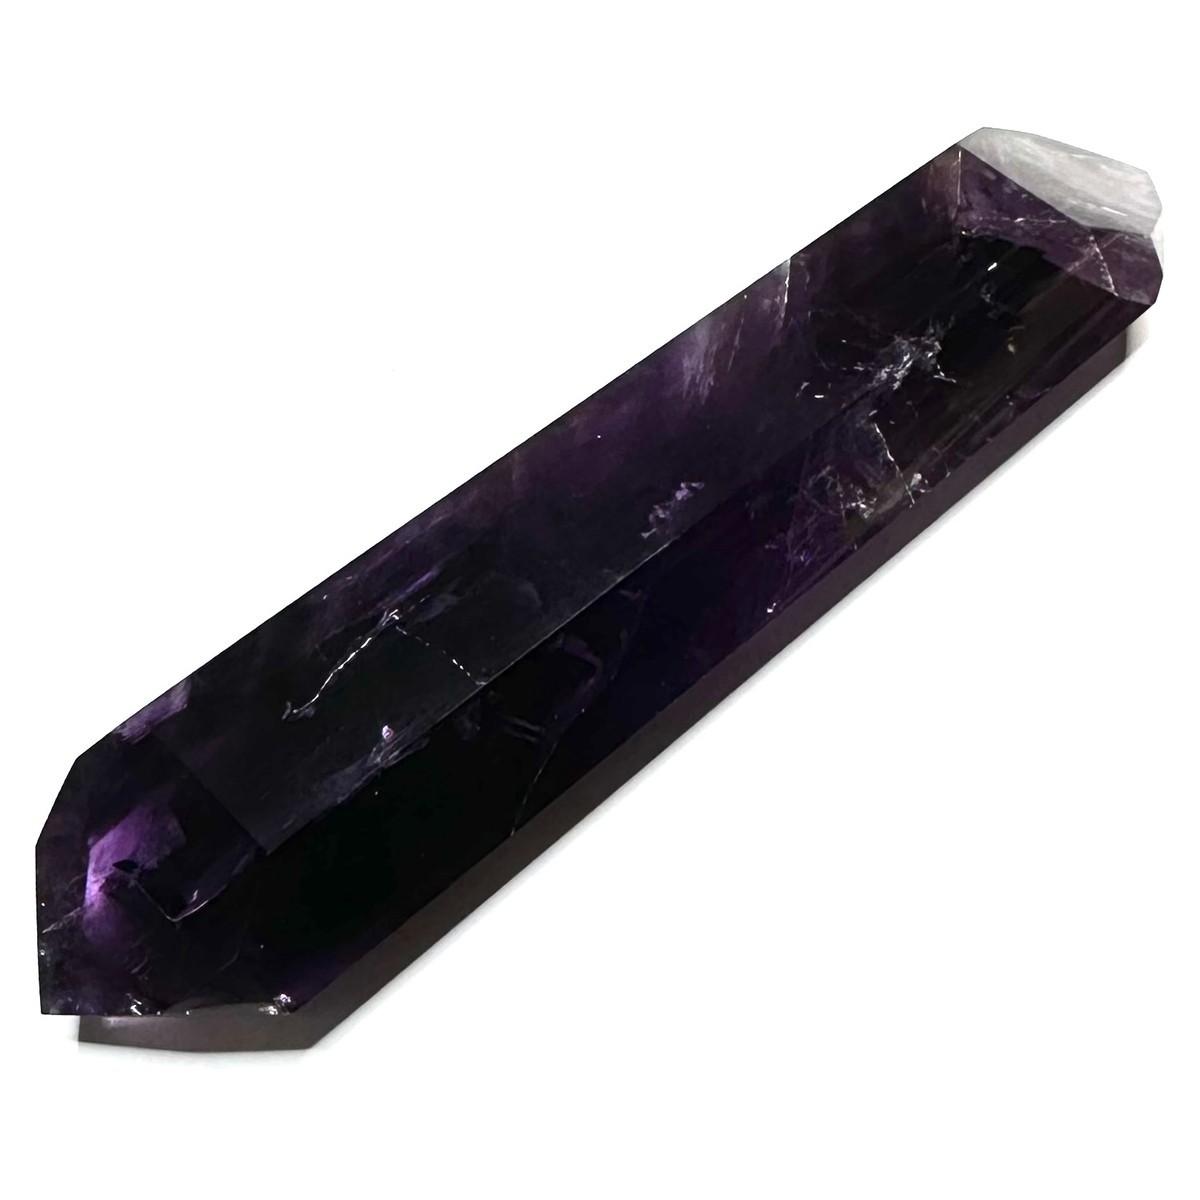 One of a Kind Amethyst with Rainbow Inclusions Double Terminated Point-5 1/2 x 1 1/4"